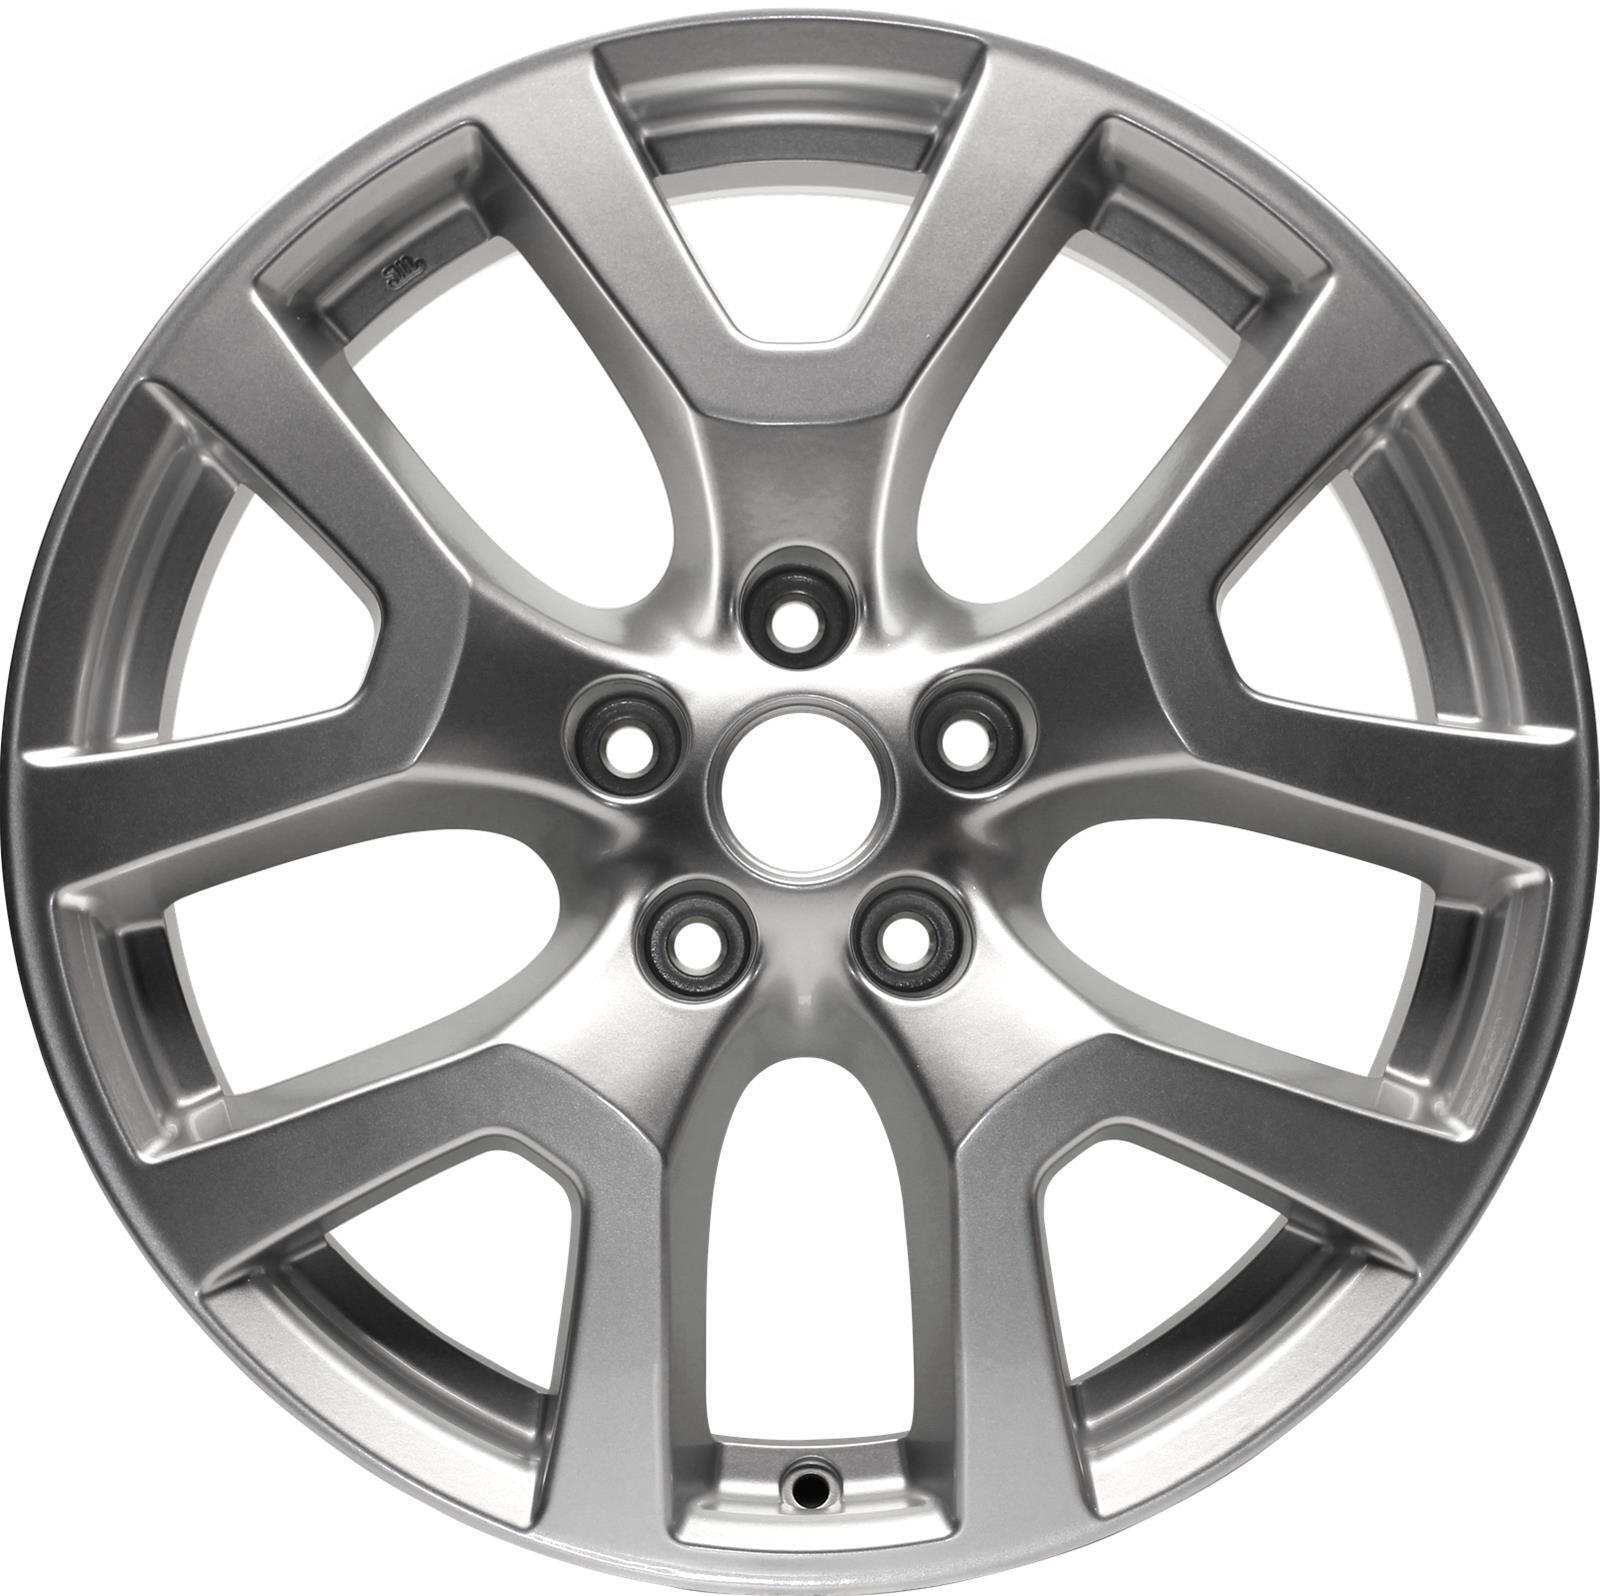 New Alloy Wheel for 11-15 Nissan Rogue 18x7 OE Replacement Part